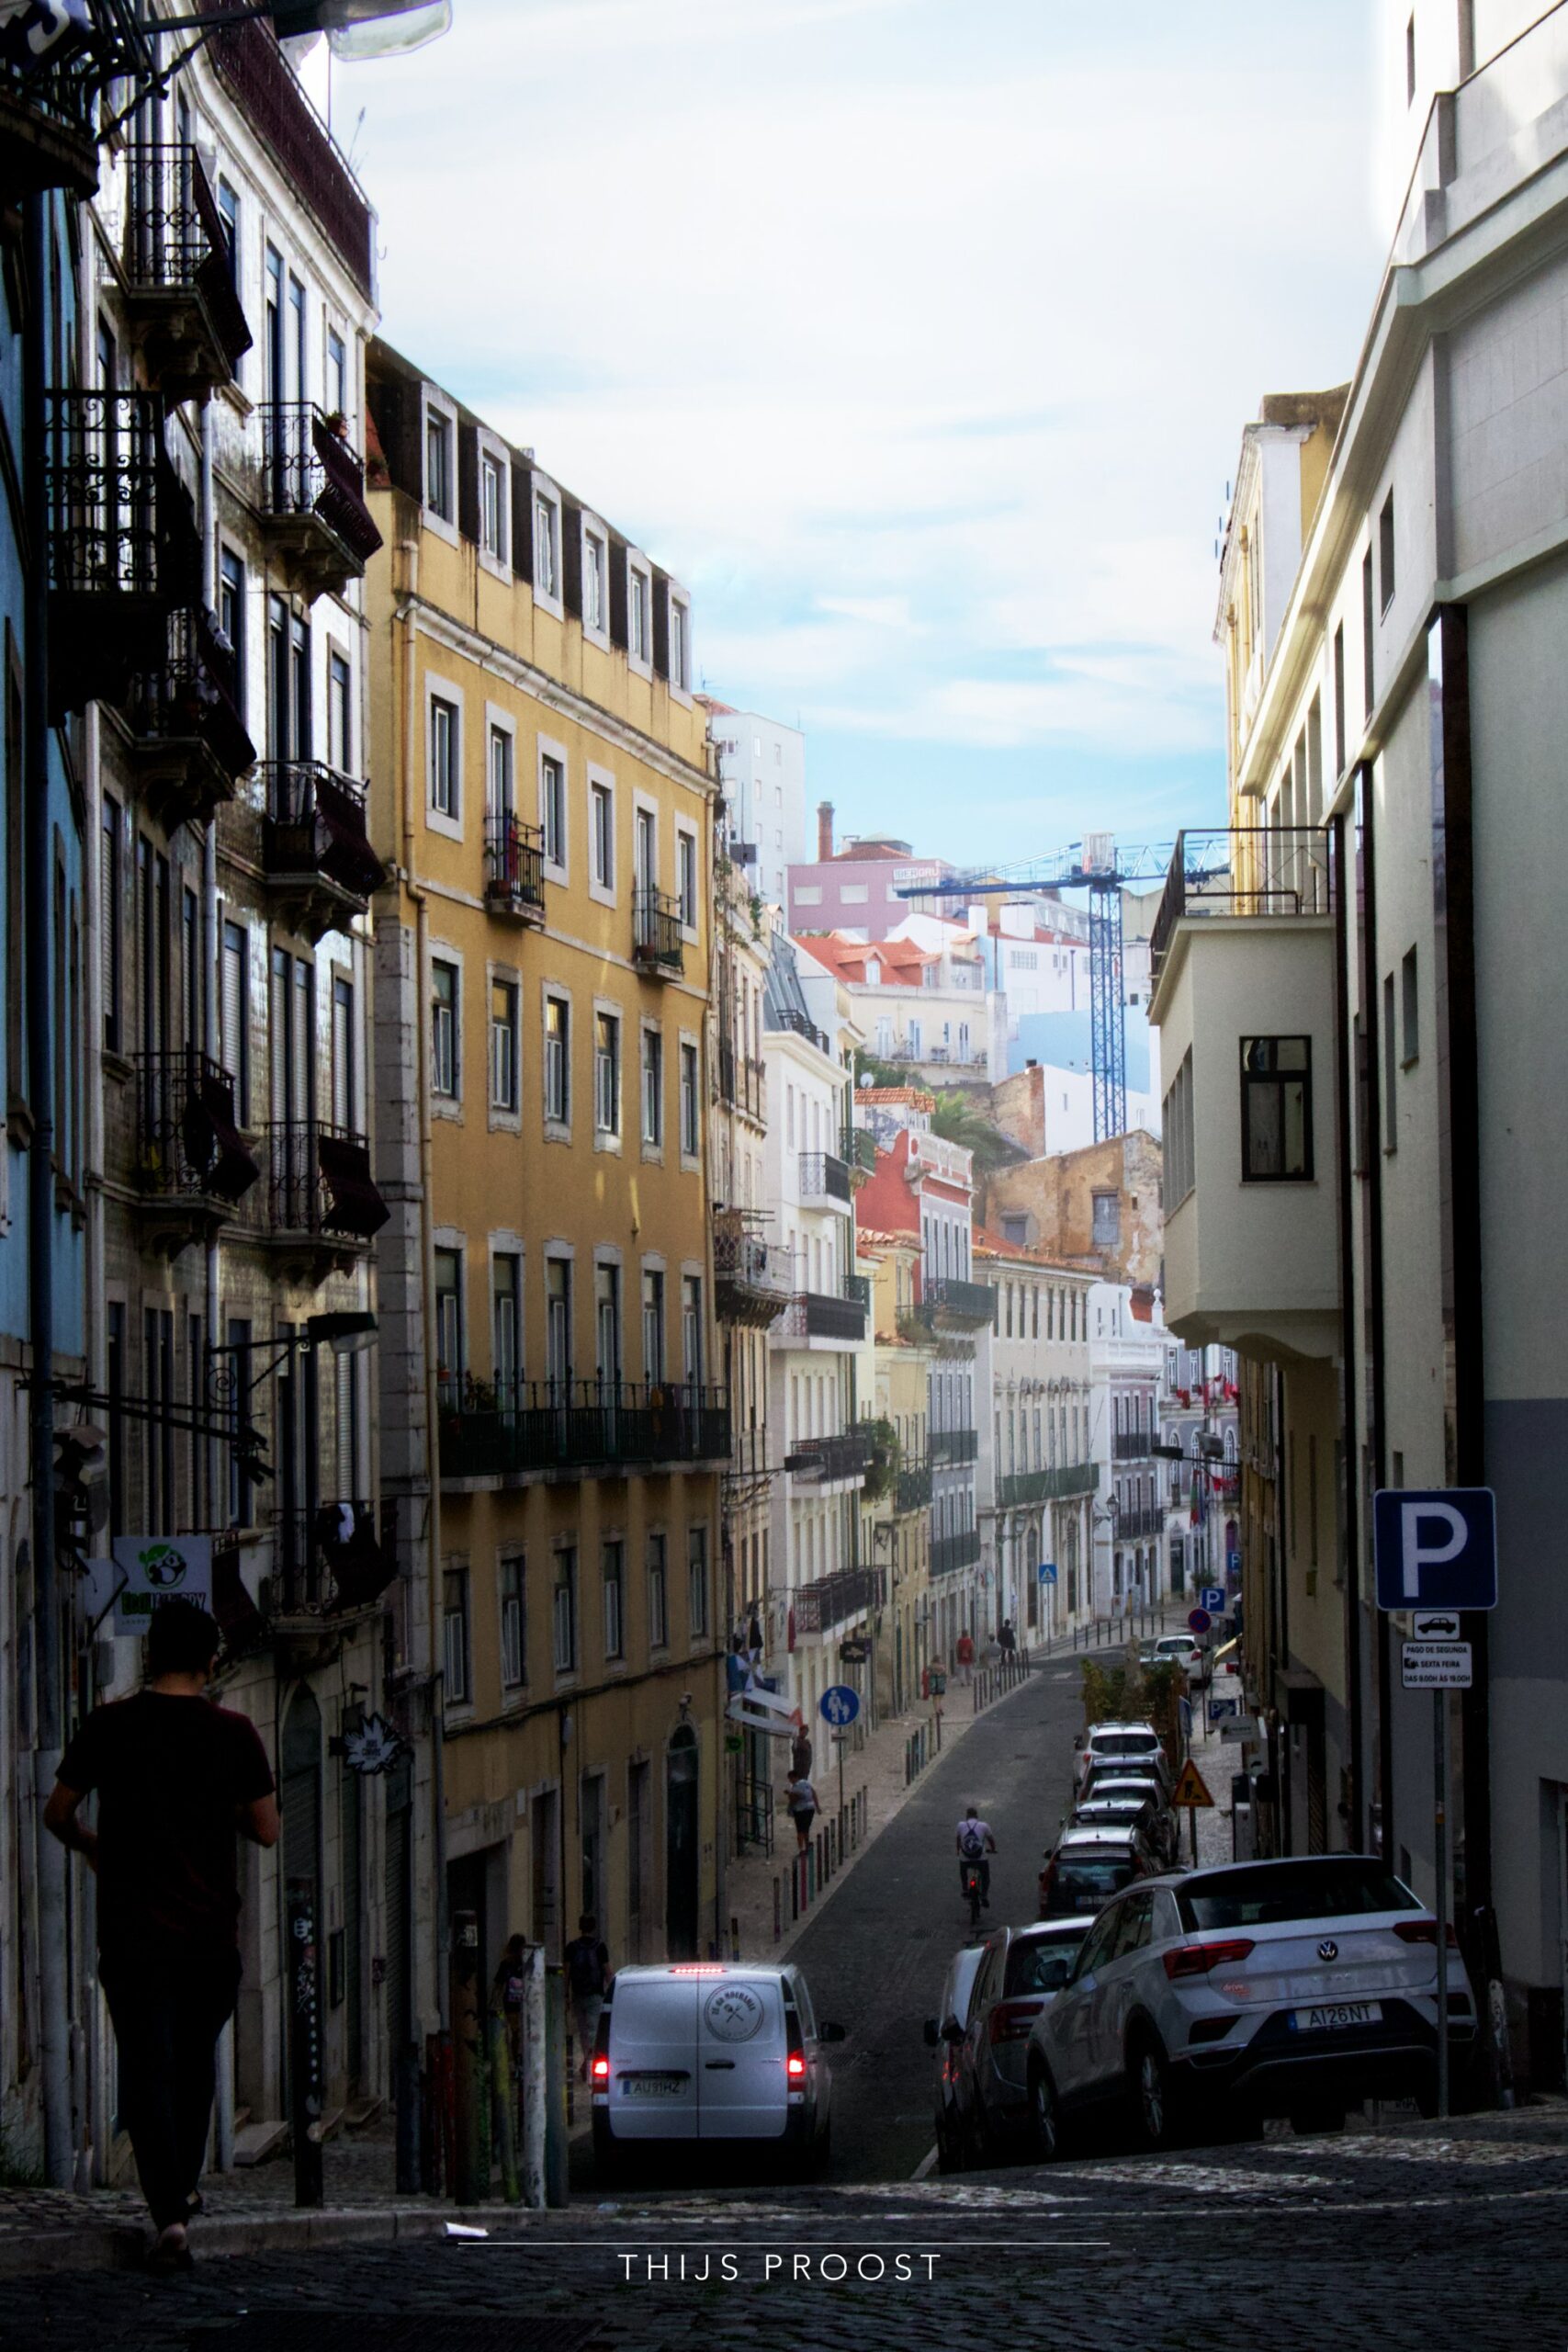 A view of a street in Lisbon wat cars parked at the side.